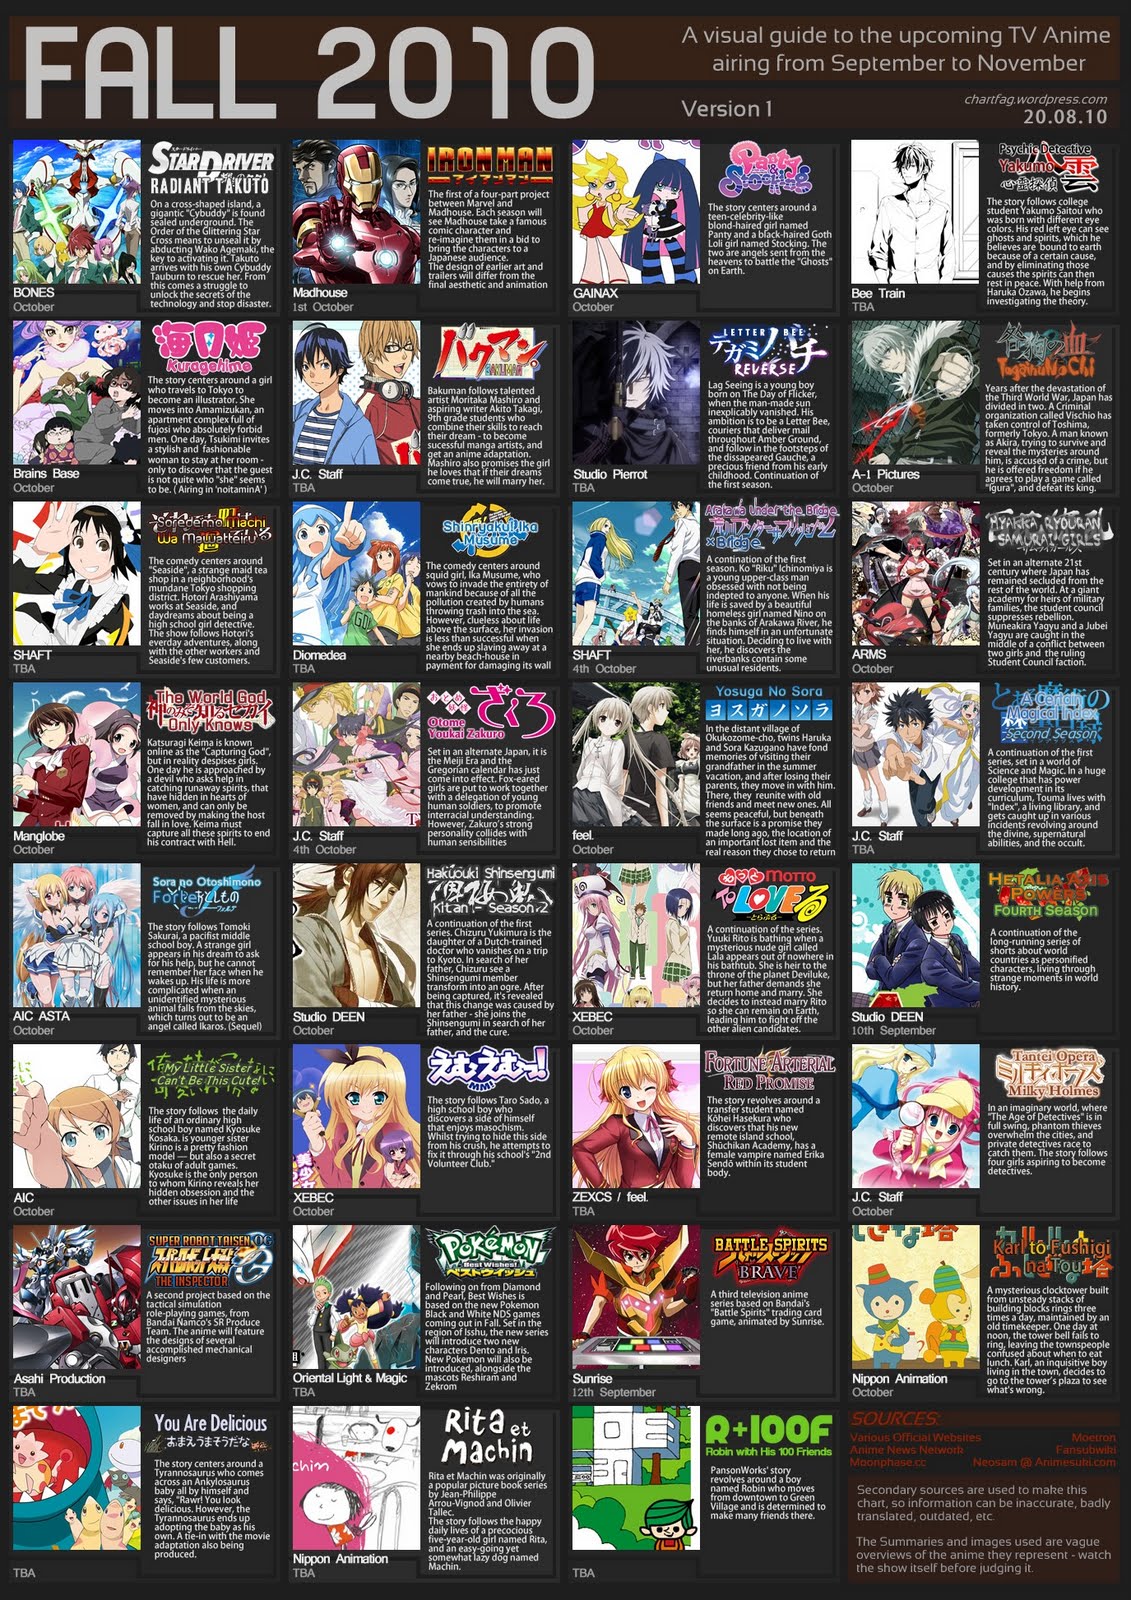 2 old 4 anime?: Fall 2010 Anime Lineup from Japan